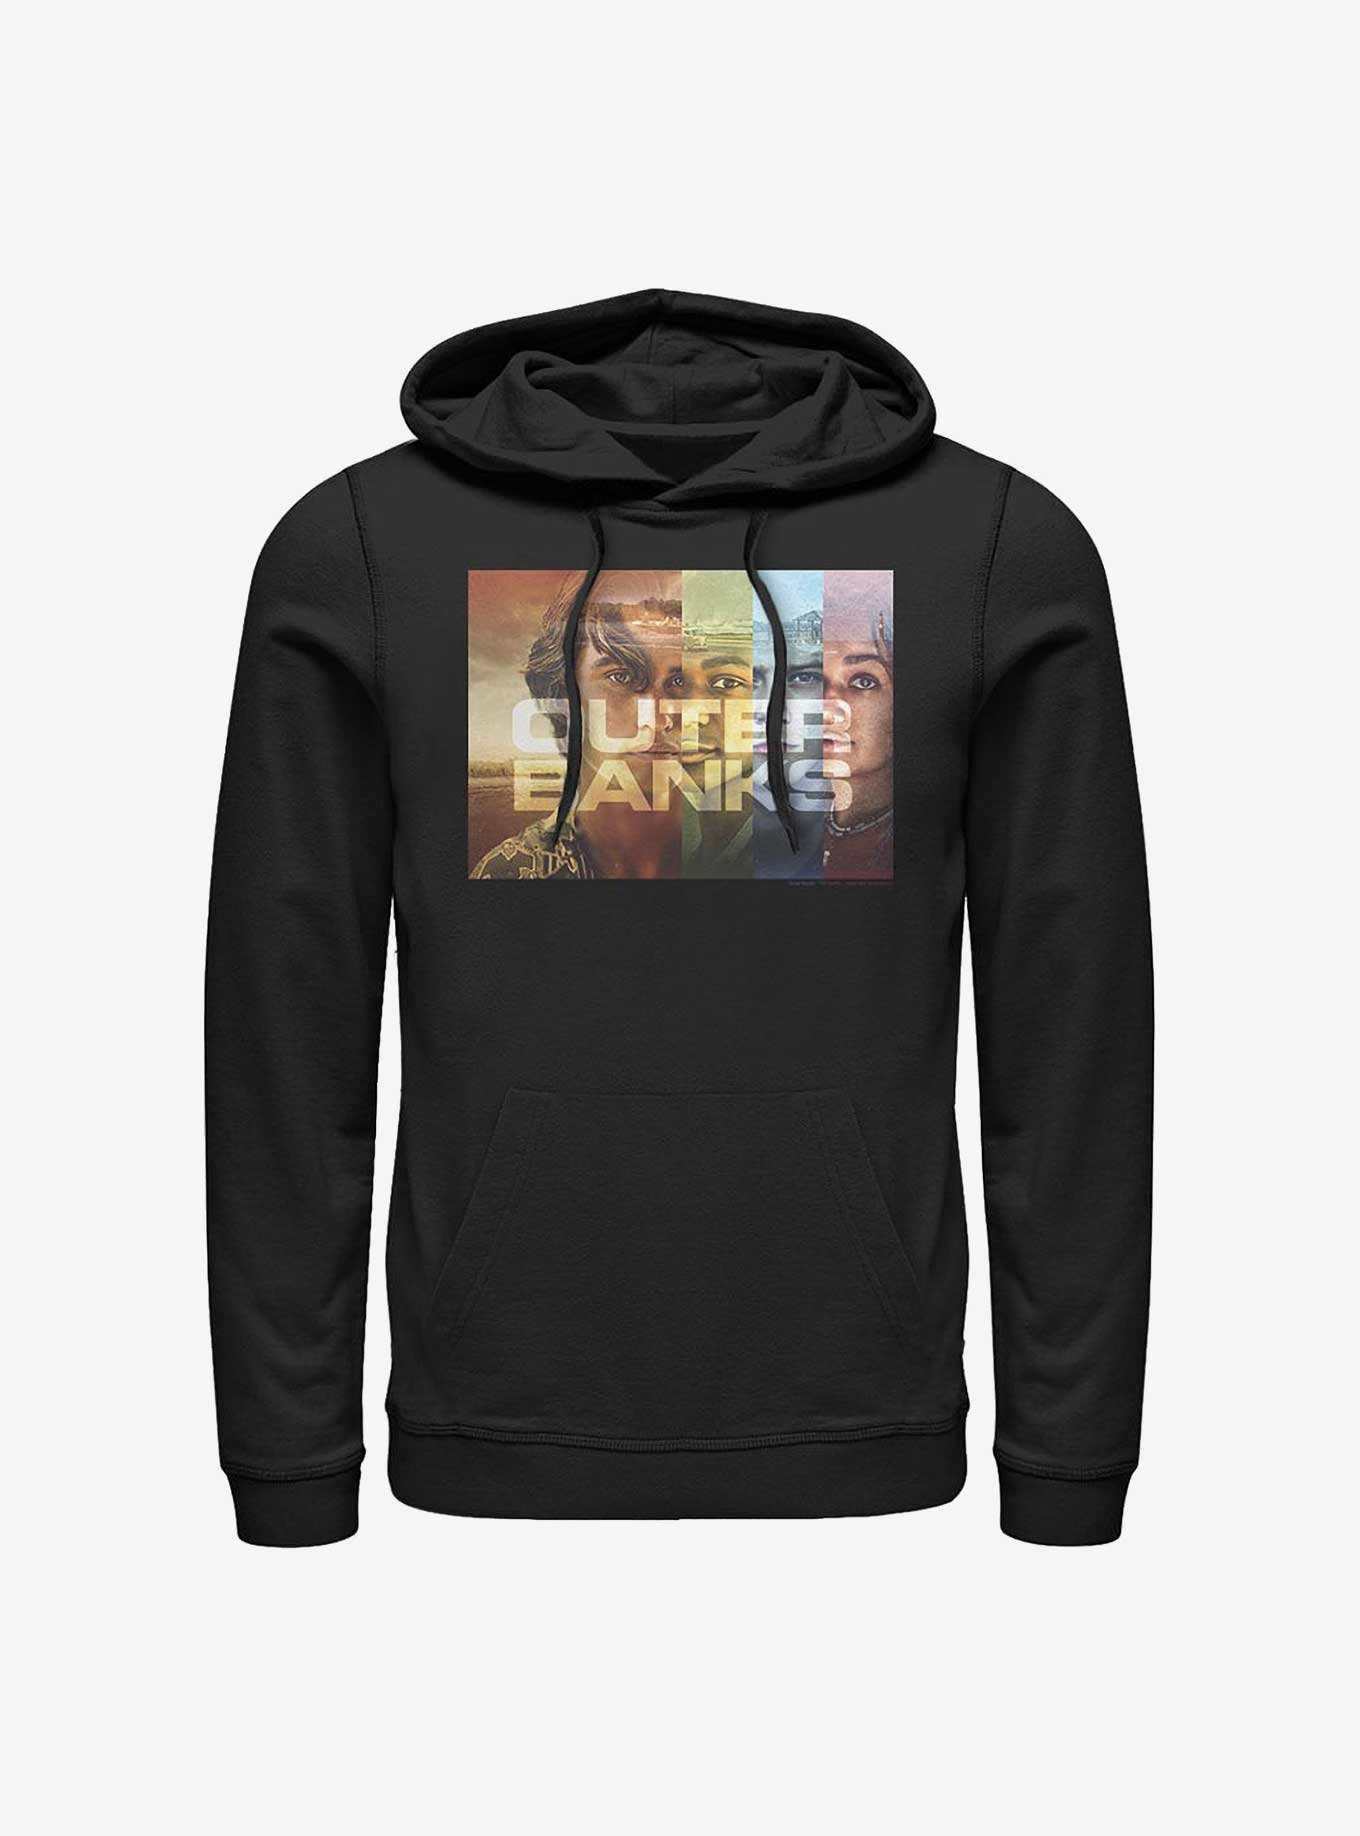 Outer Banks Cover Poster Hoodie, , hi-res